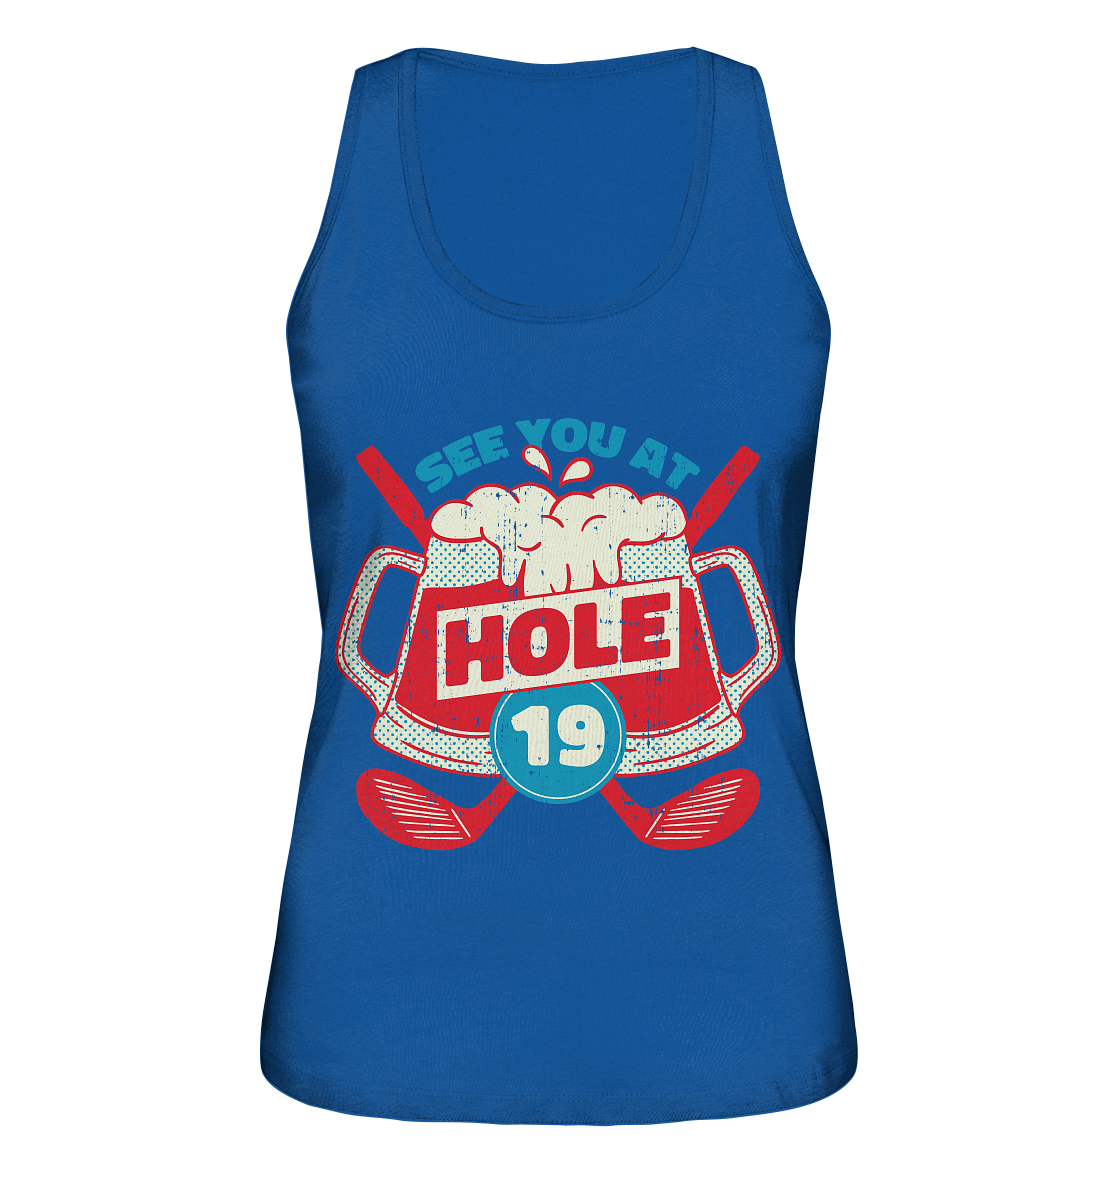 Golf ,See you at Hole 19 , Wir sehen uns bei Loch 19 - Ladies Organic Tank-Top